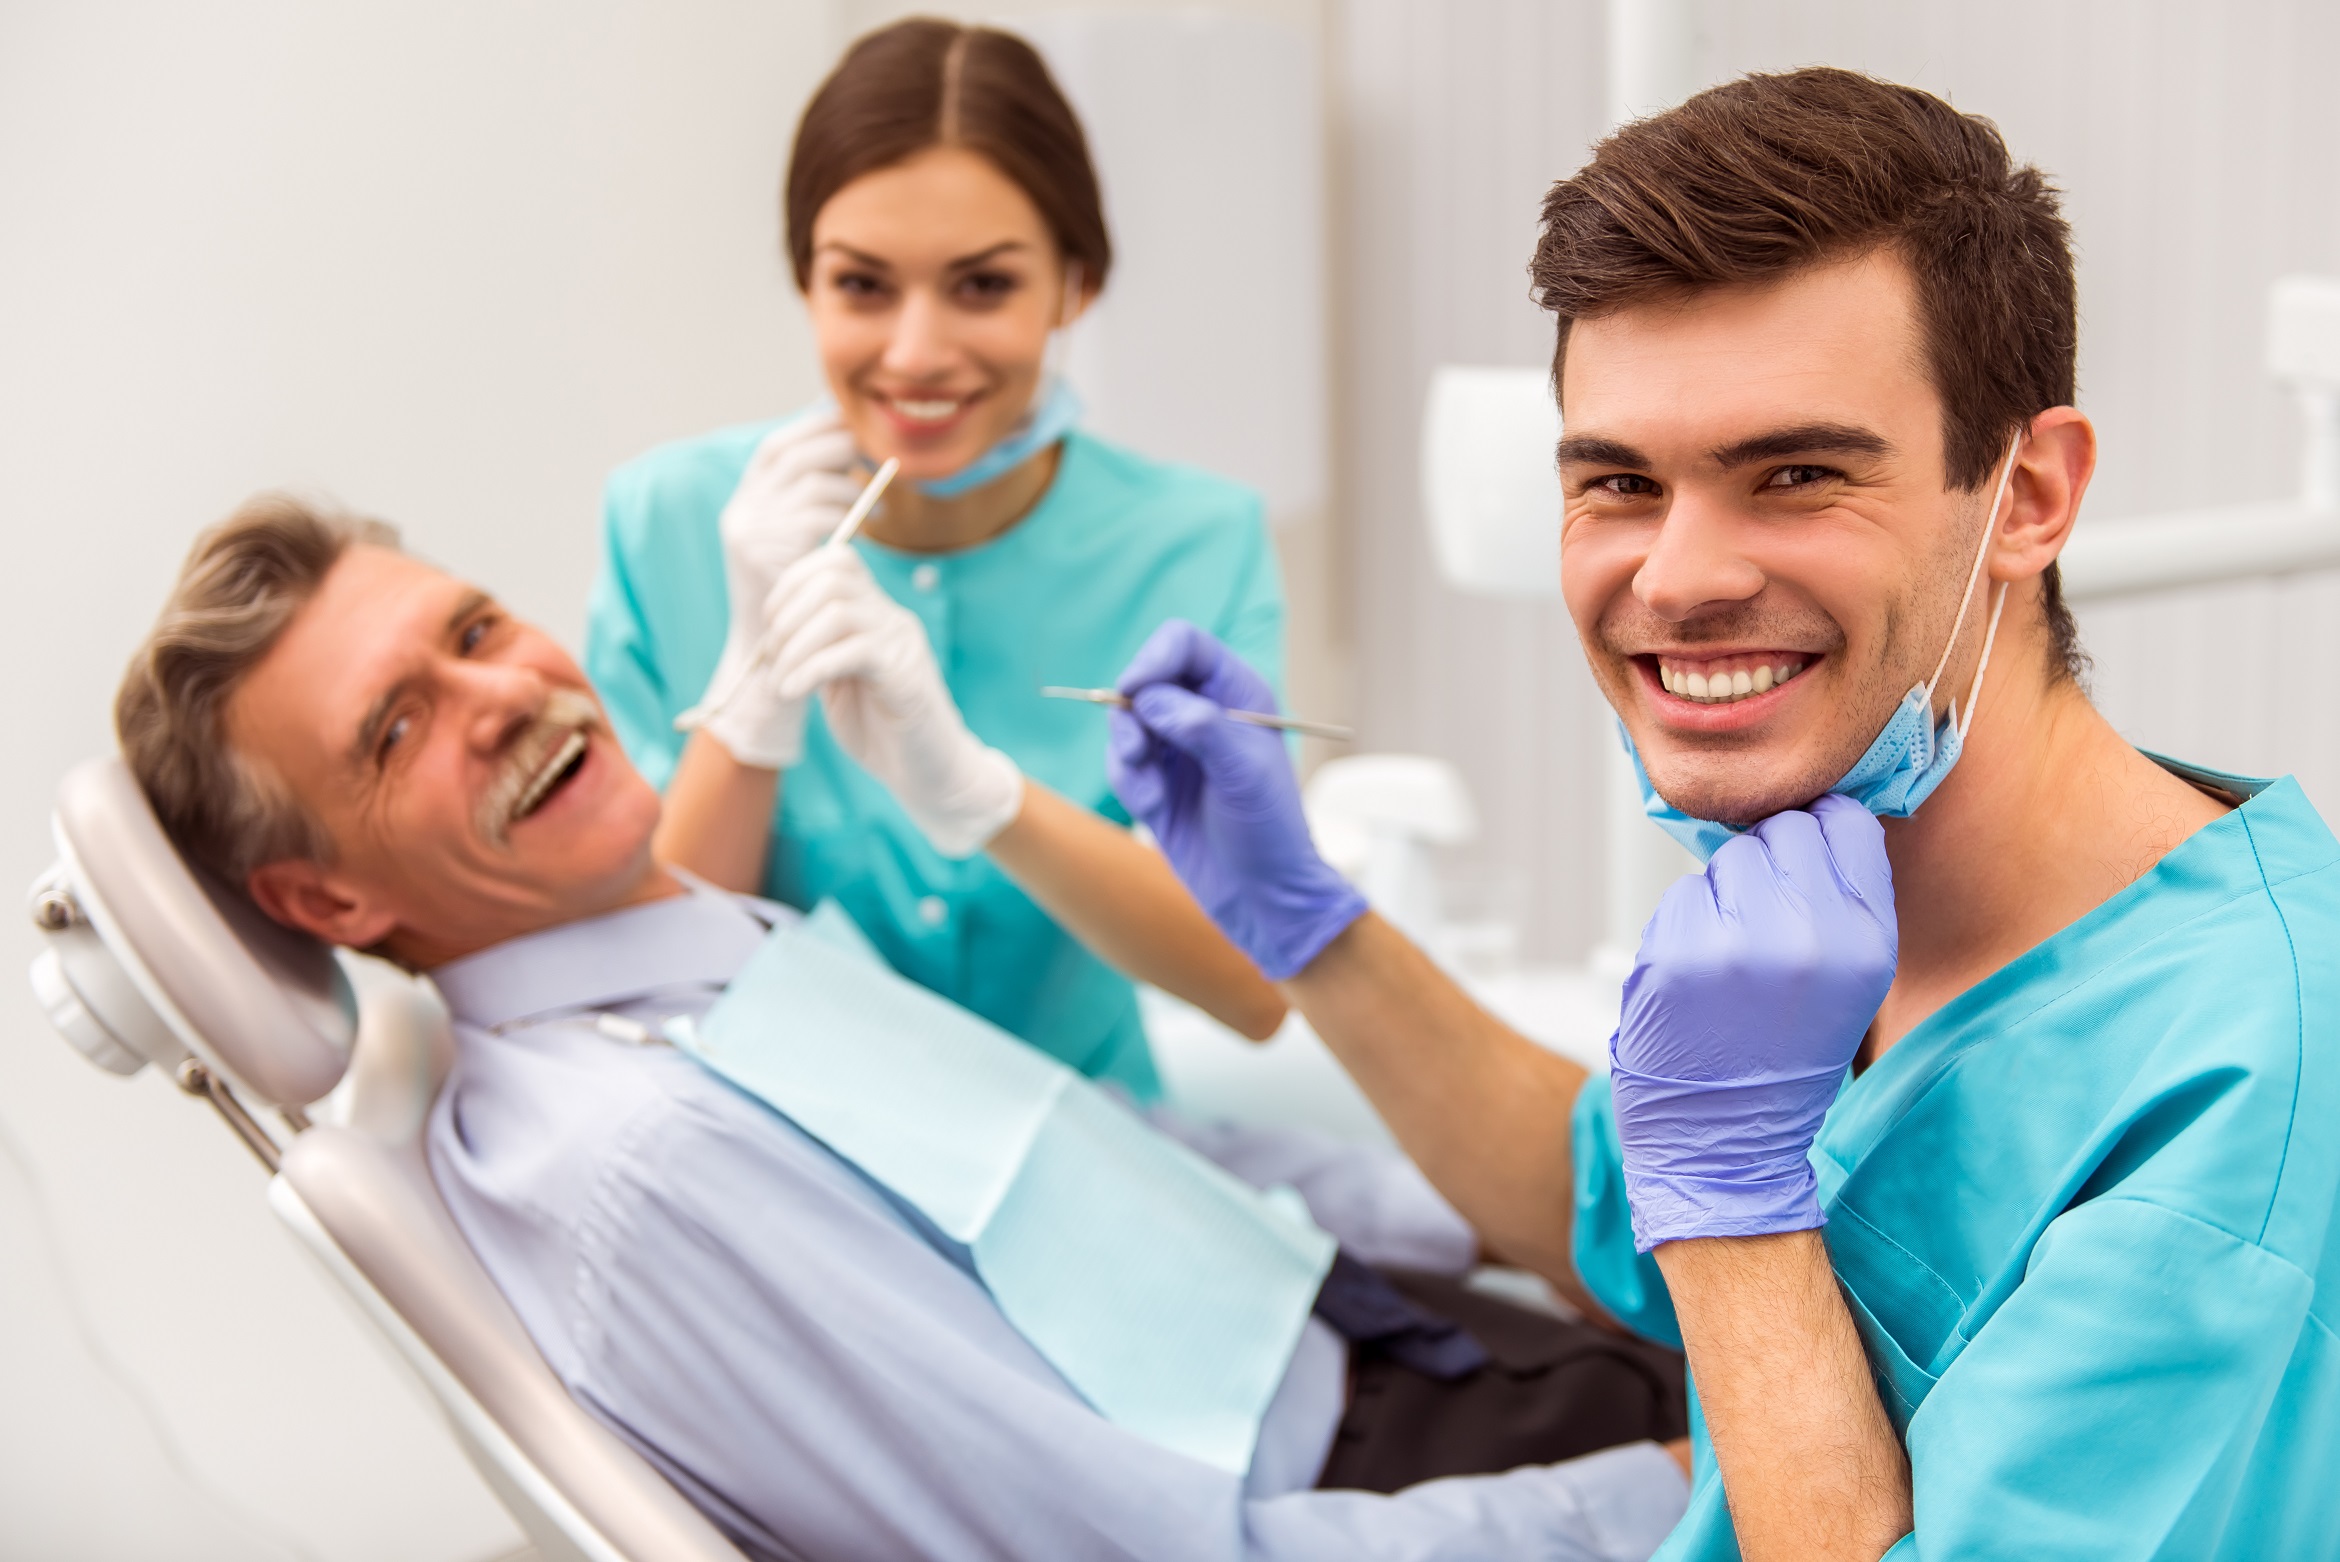 What to Expect with Sedation During Your Implant Procedure